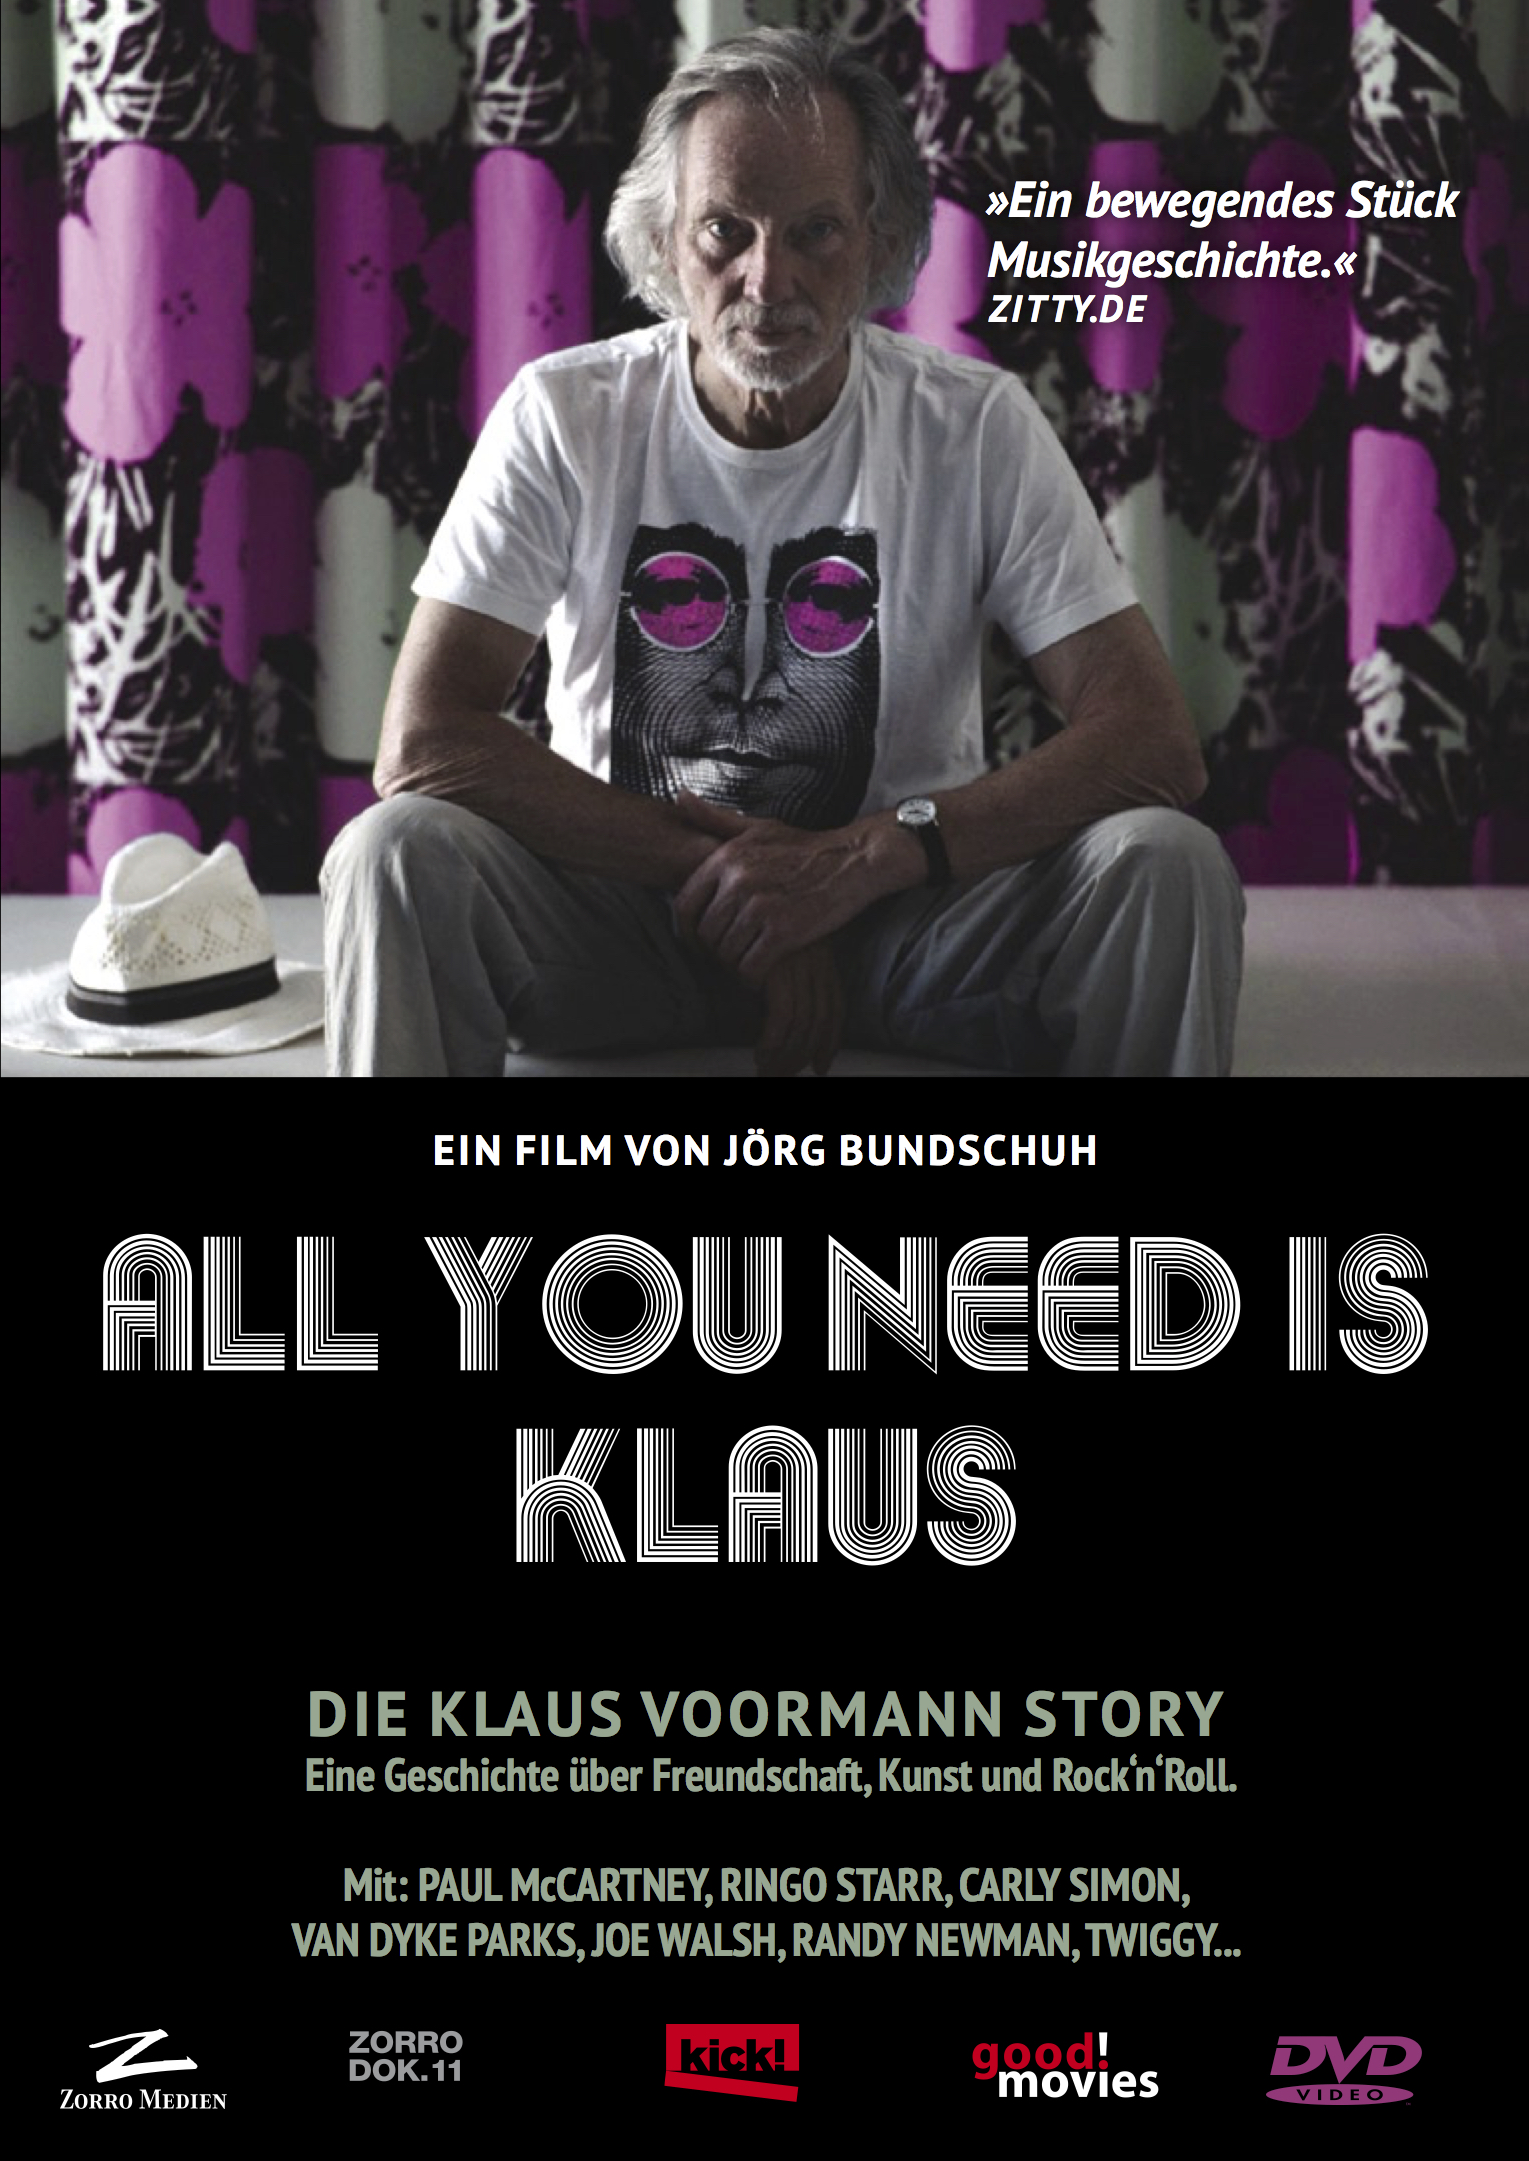 All You Need Is Klaus (2009) starring Klaus Voormann on DVD on DVD